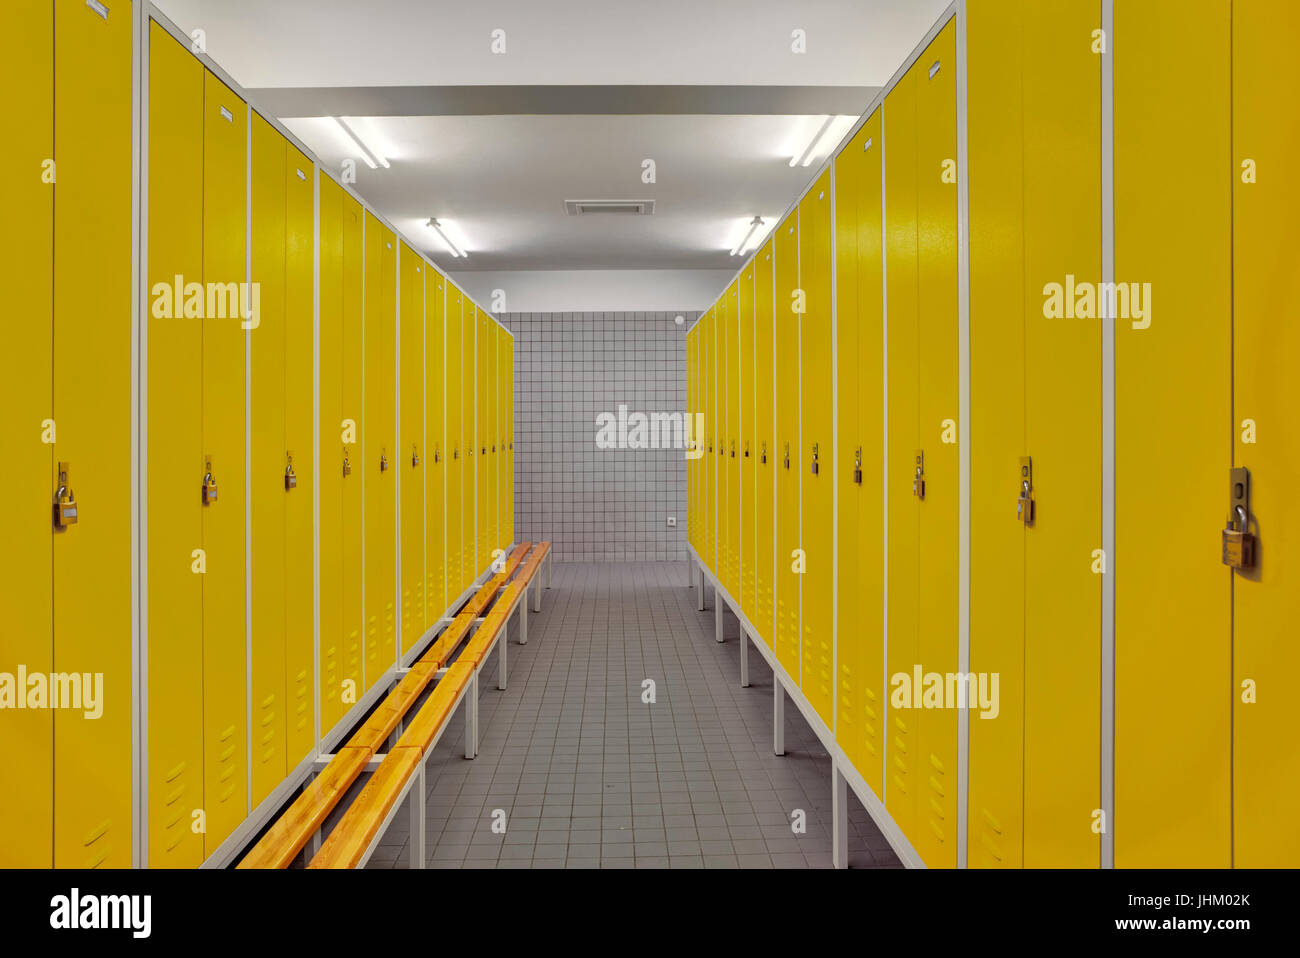 Interior of changing room in gym Stock Photo